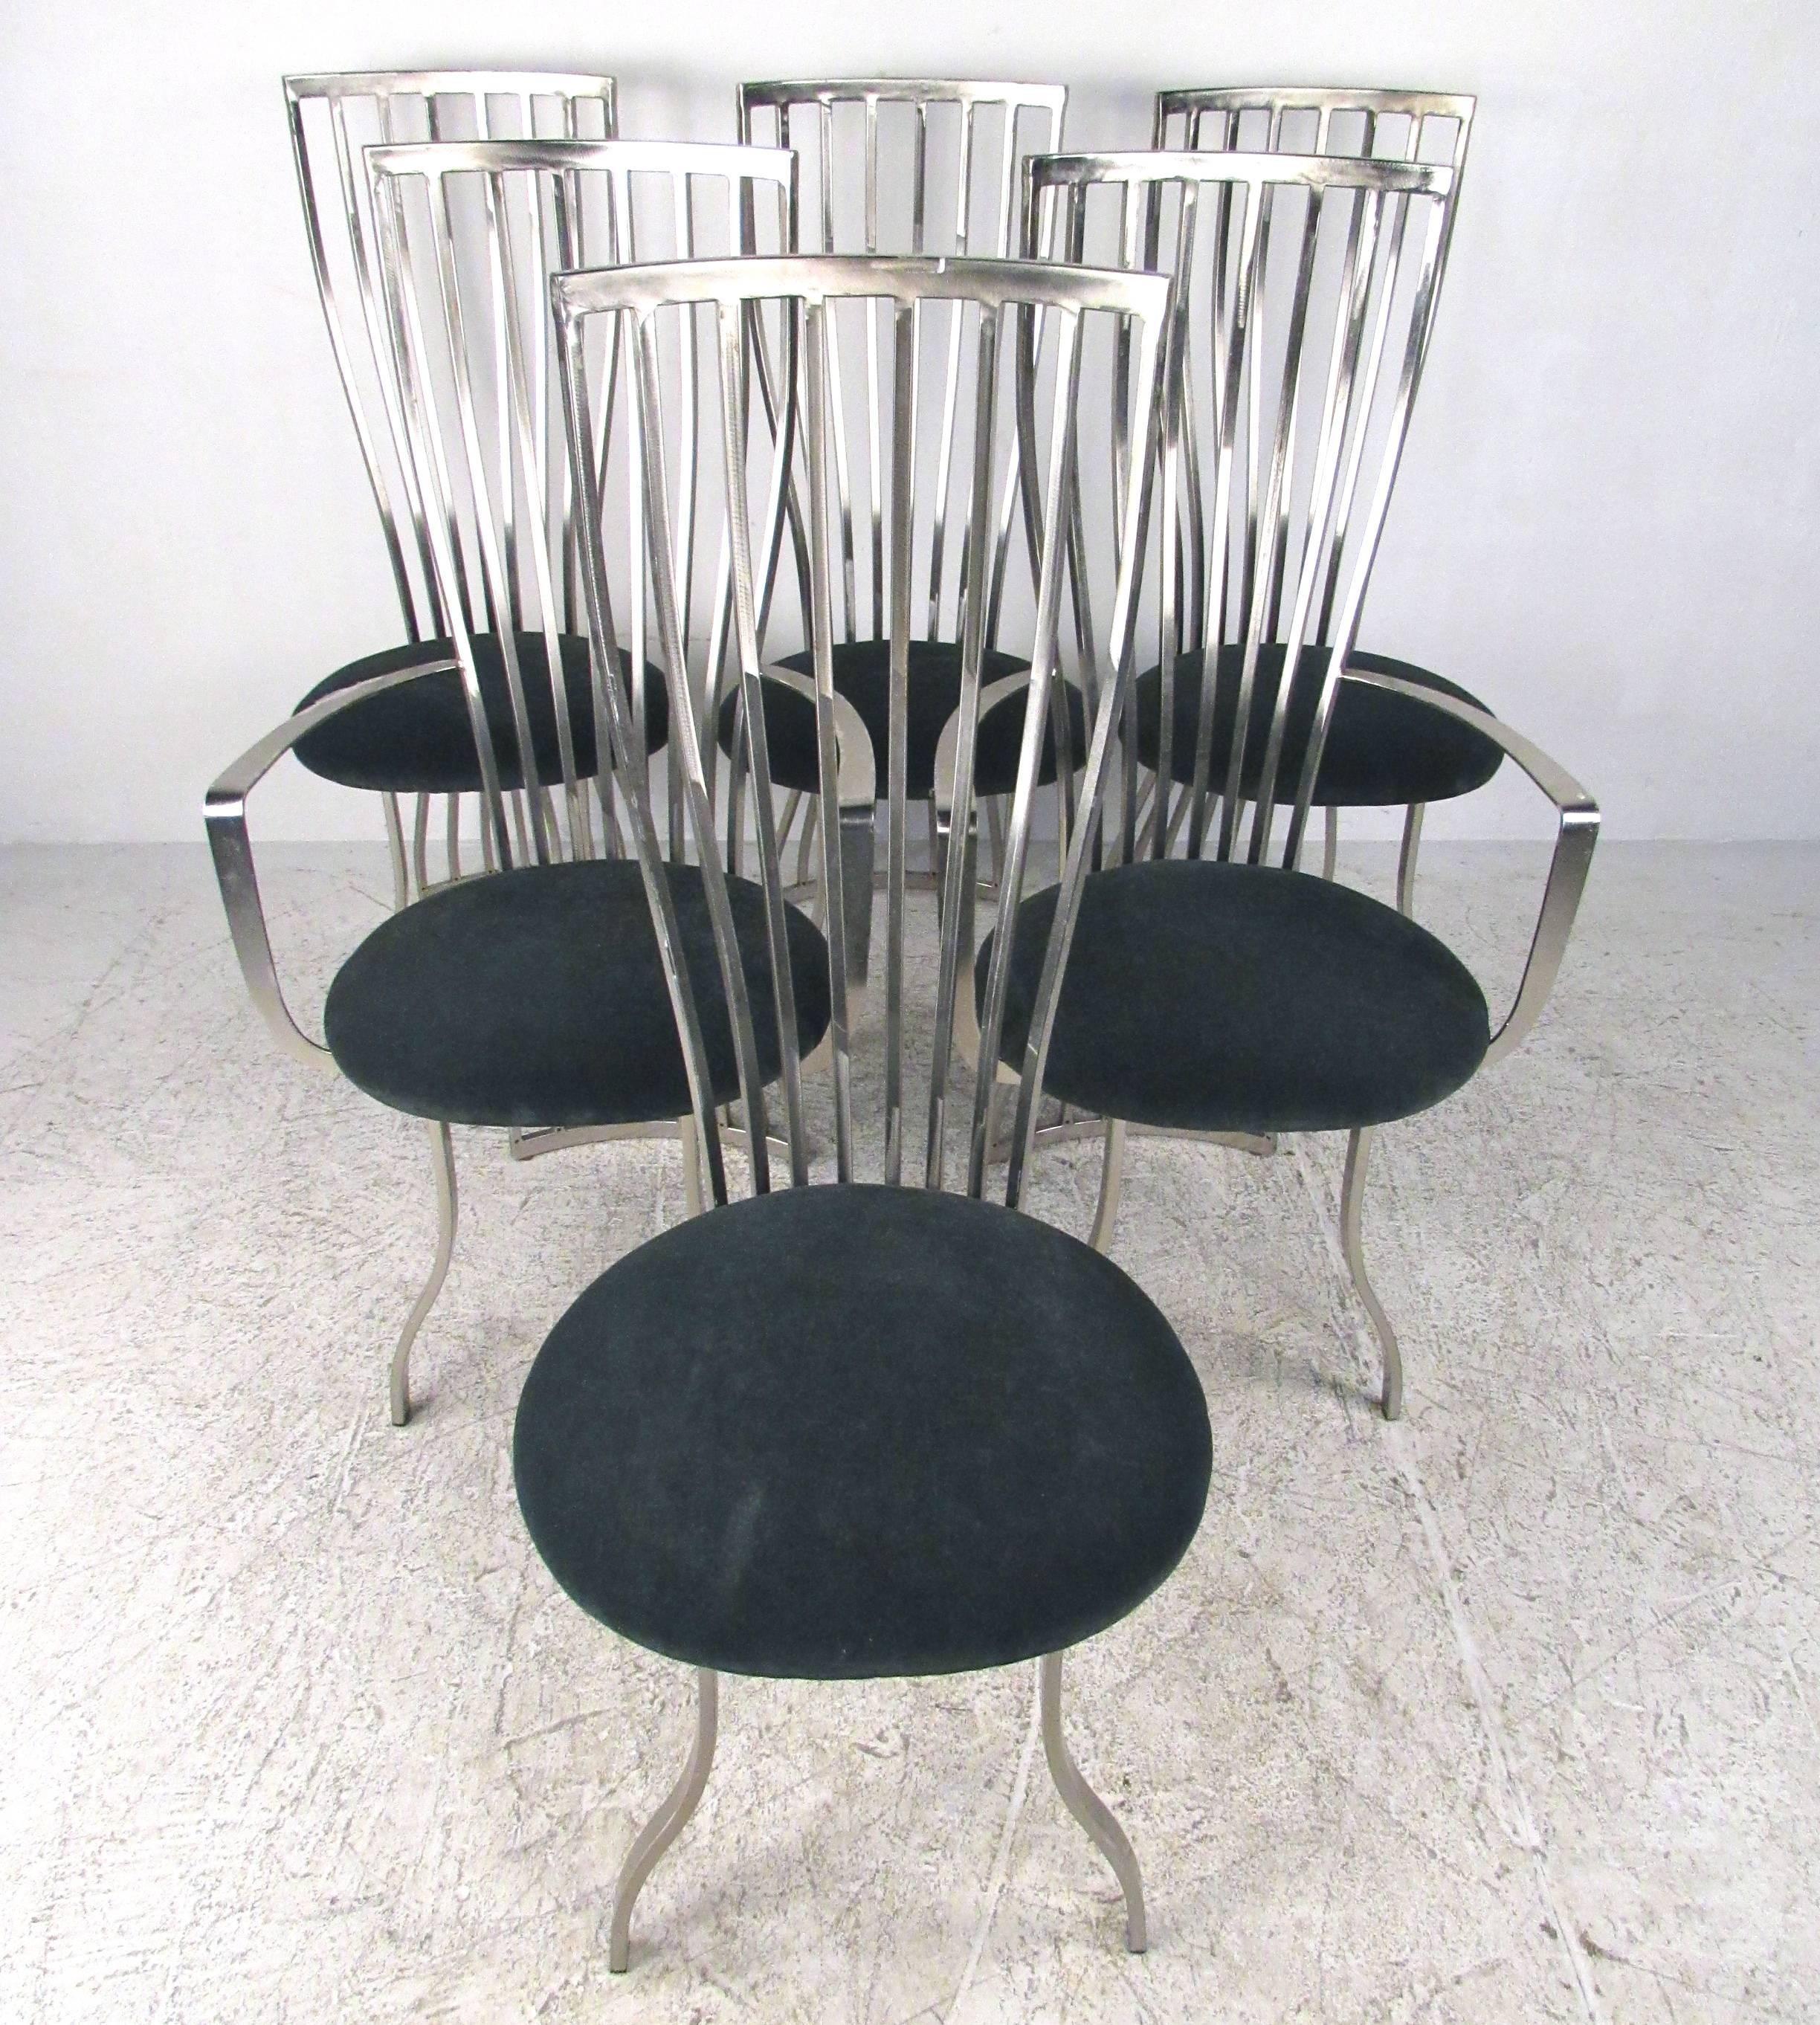 This unique set of high back dining chairs features sturdy steel frames with uniquely elegant curved backs and legs. Comfortable upholstered seats add to the appeal of the set of six, which includes two armchairs. Please confirm item location (NY or